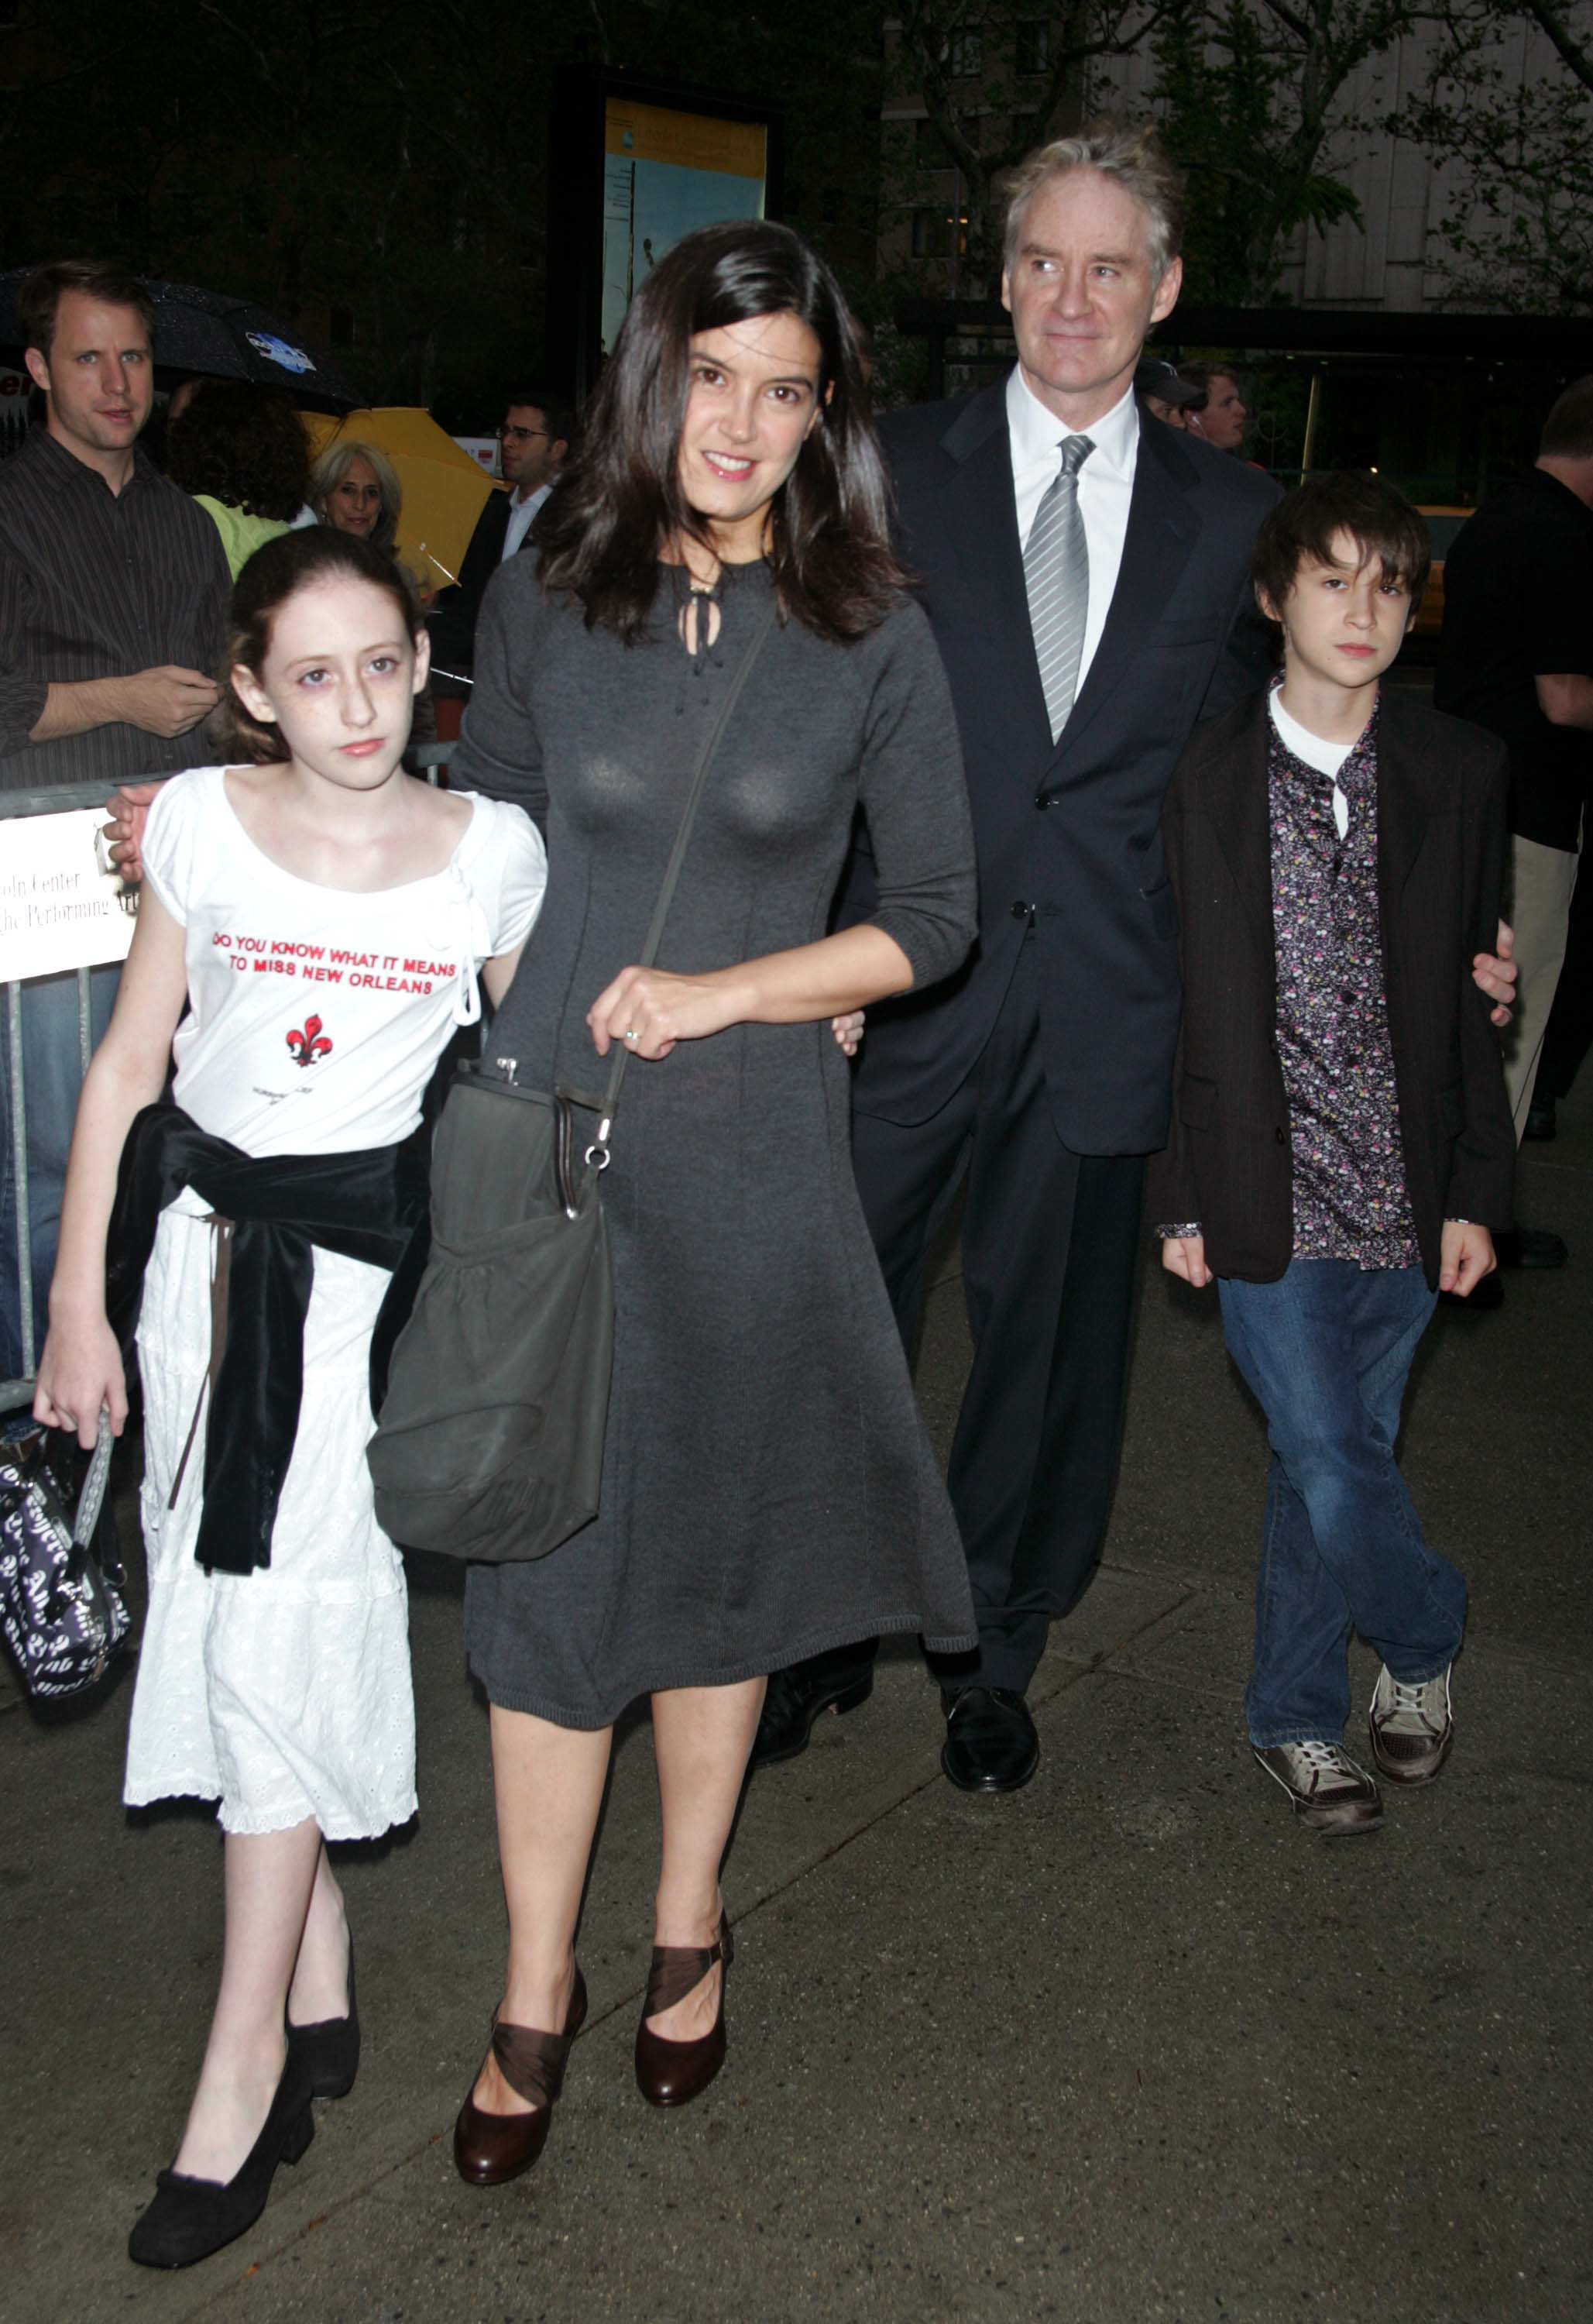 Greta Kline, Phoebe Cates, Kevin Kline and Owen Kline at the New York Film Festival Premiere of "The Squid and the Whale" on September 26, 2005 | Source: Getty Images